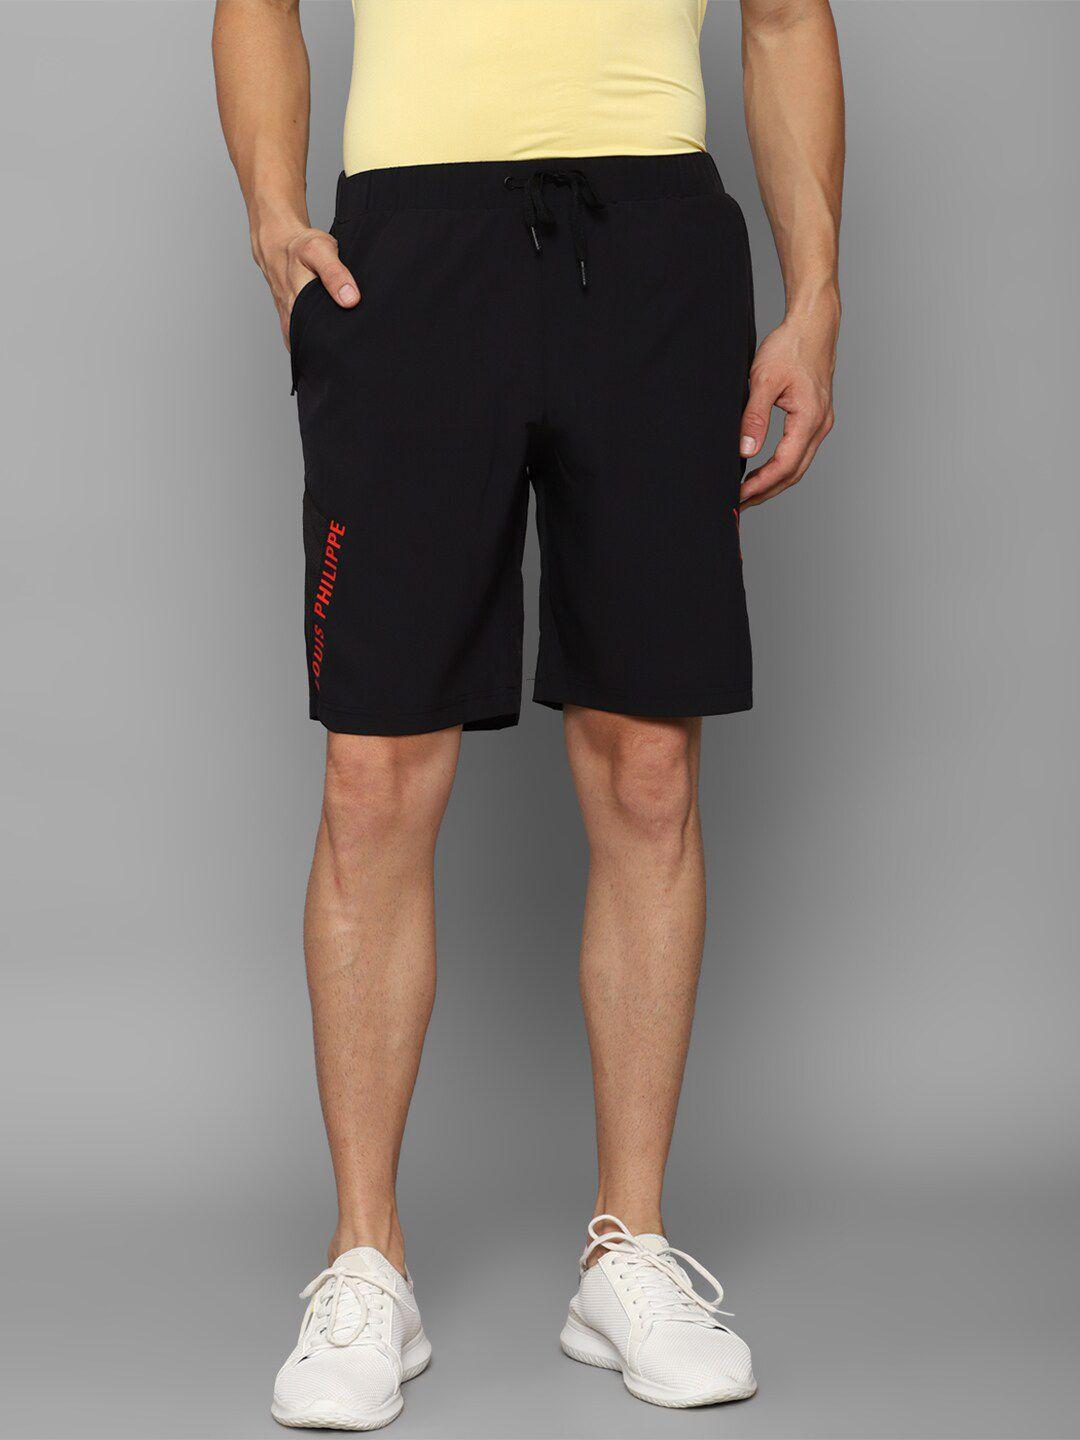 louis philippe athplay men black slim fit sports shorts